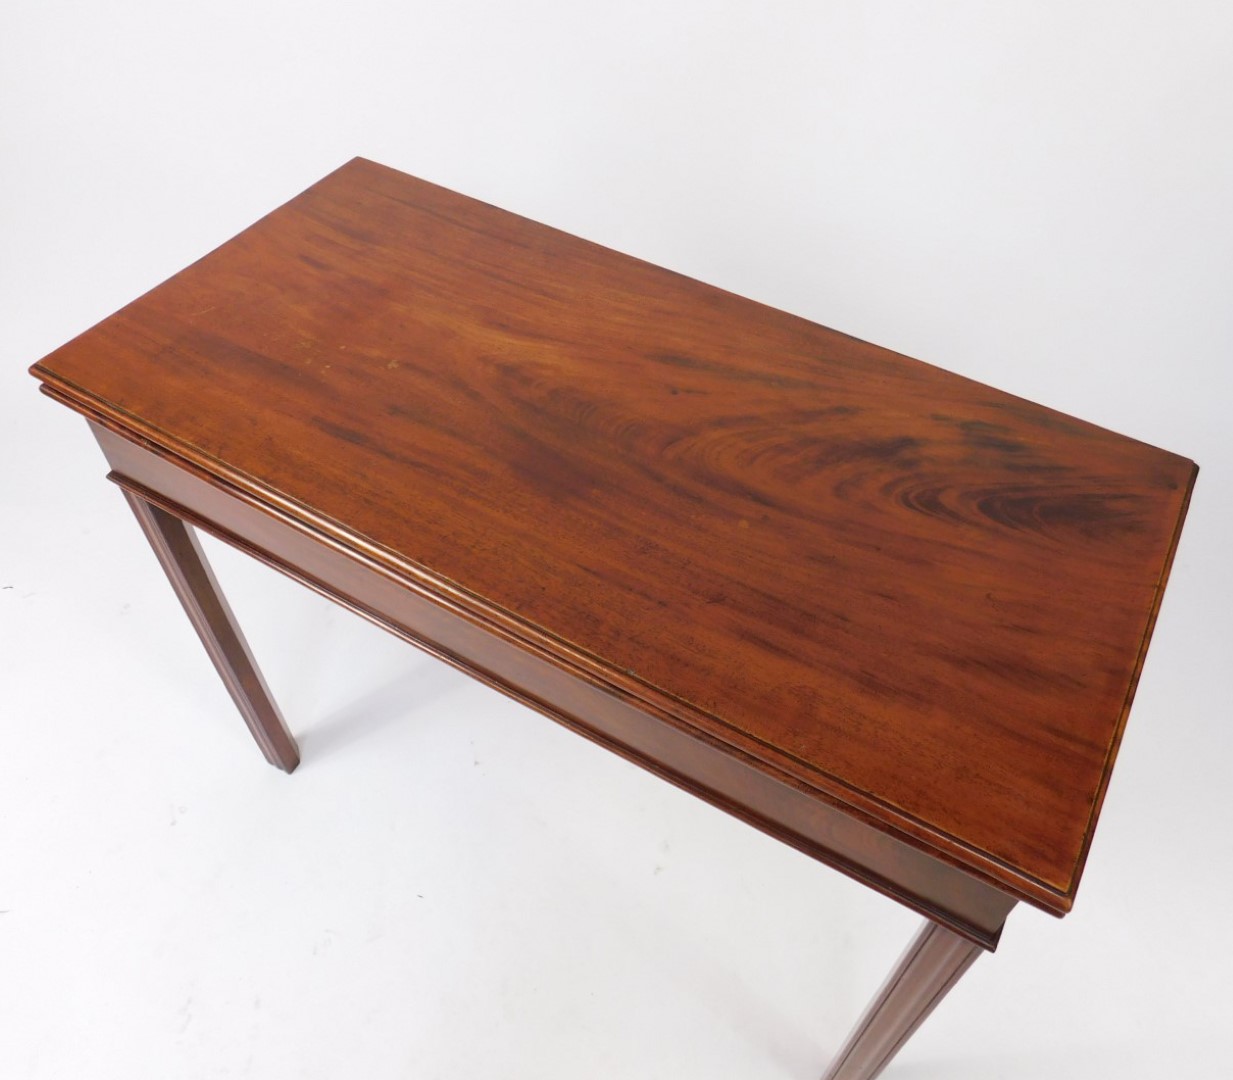 A George III mahogany fold over tea table, raised on fluted square legs, 73cm H, 92cm W, 42.5cm D. - Image 2 of 4